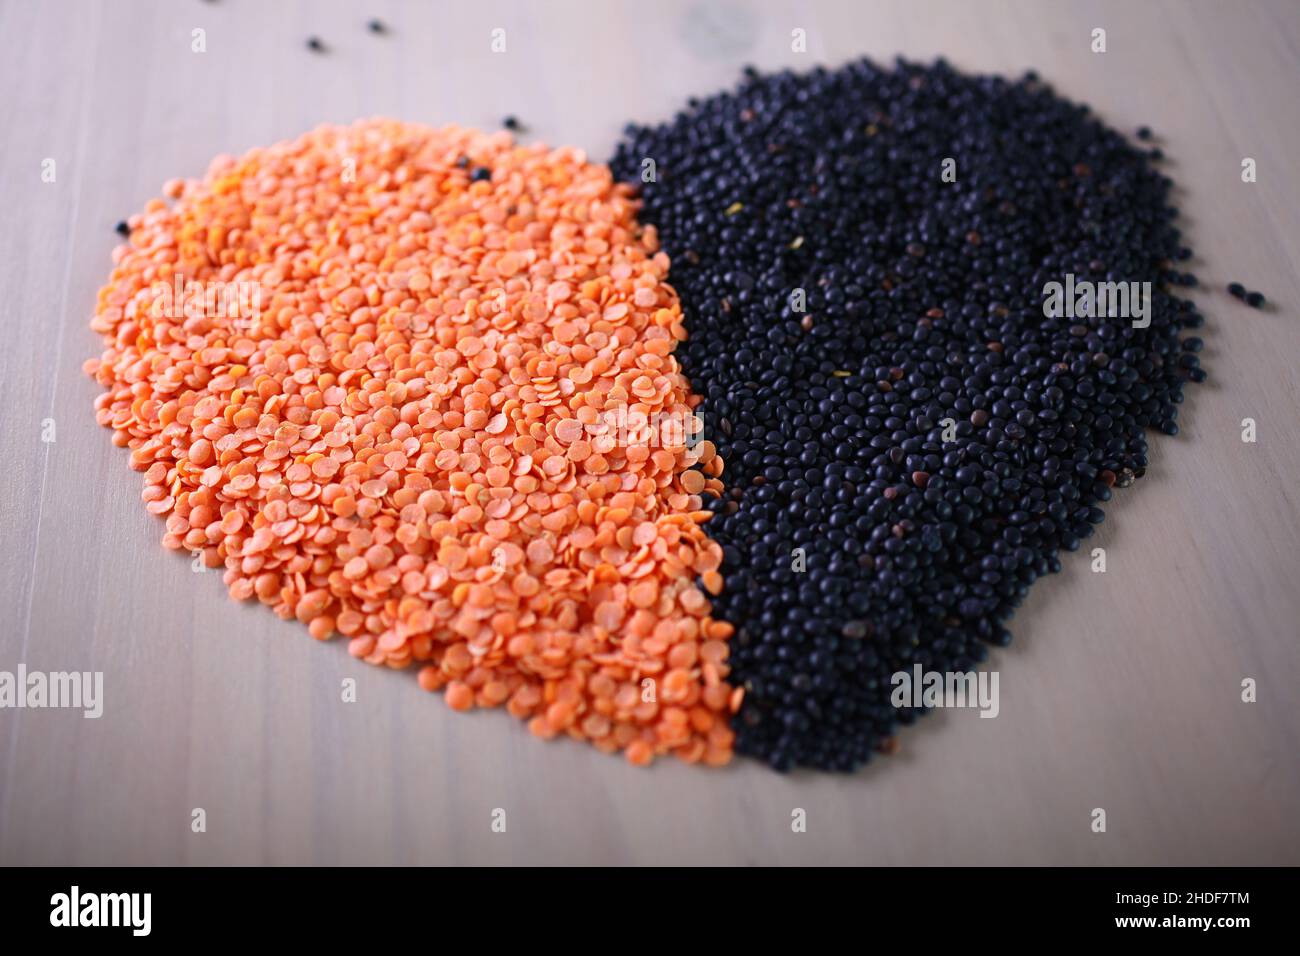 Red and black lentils forming a valentine heart shape for healthy living Stock Photo